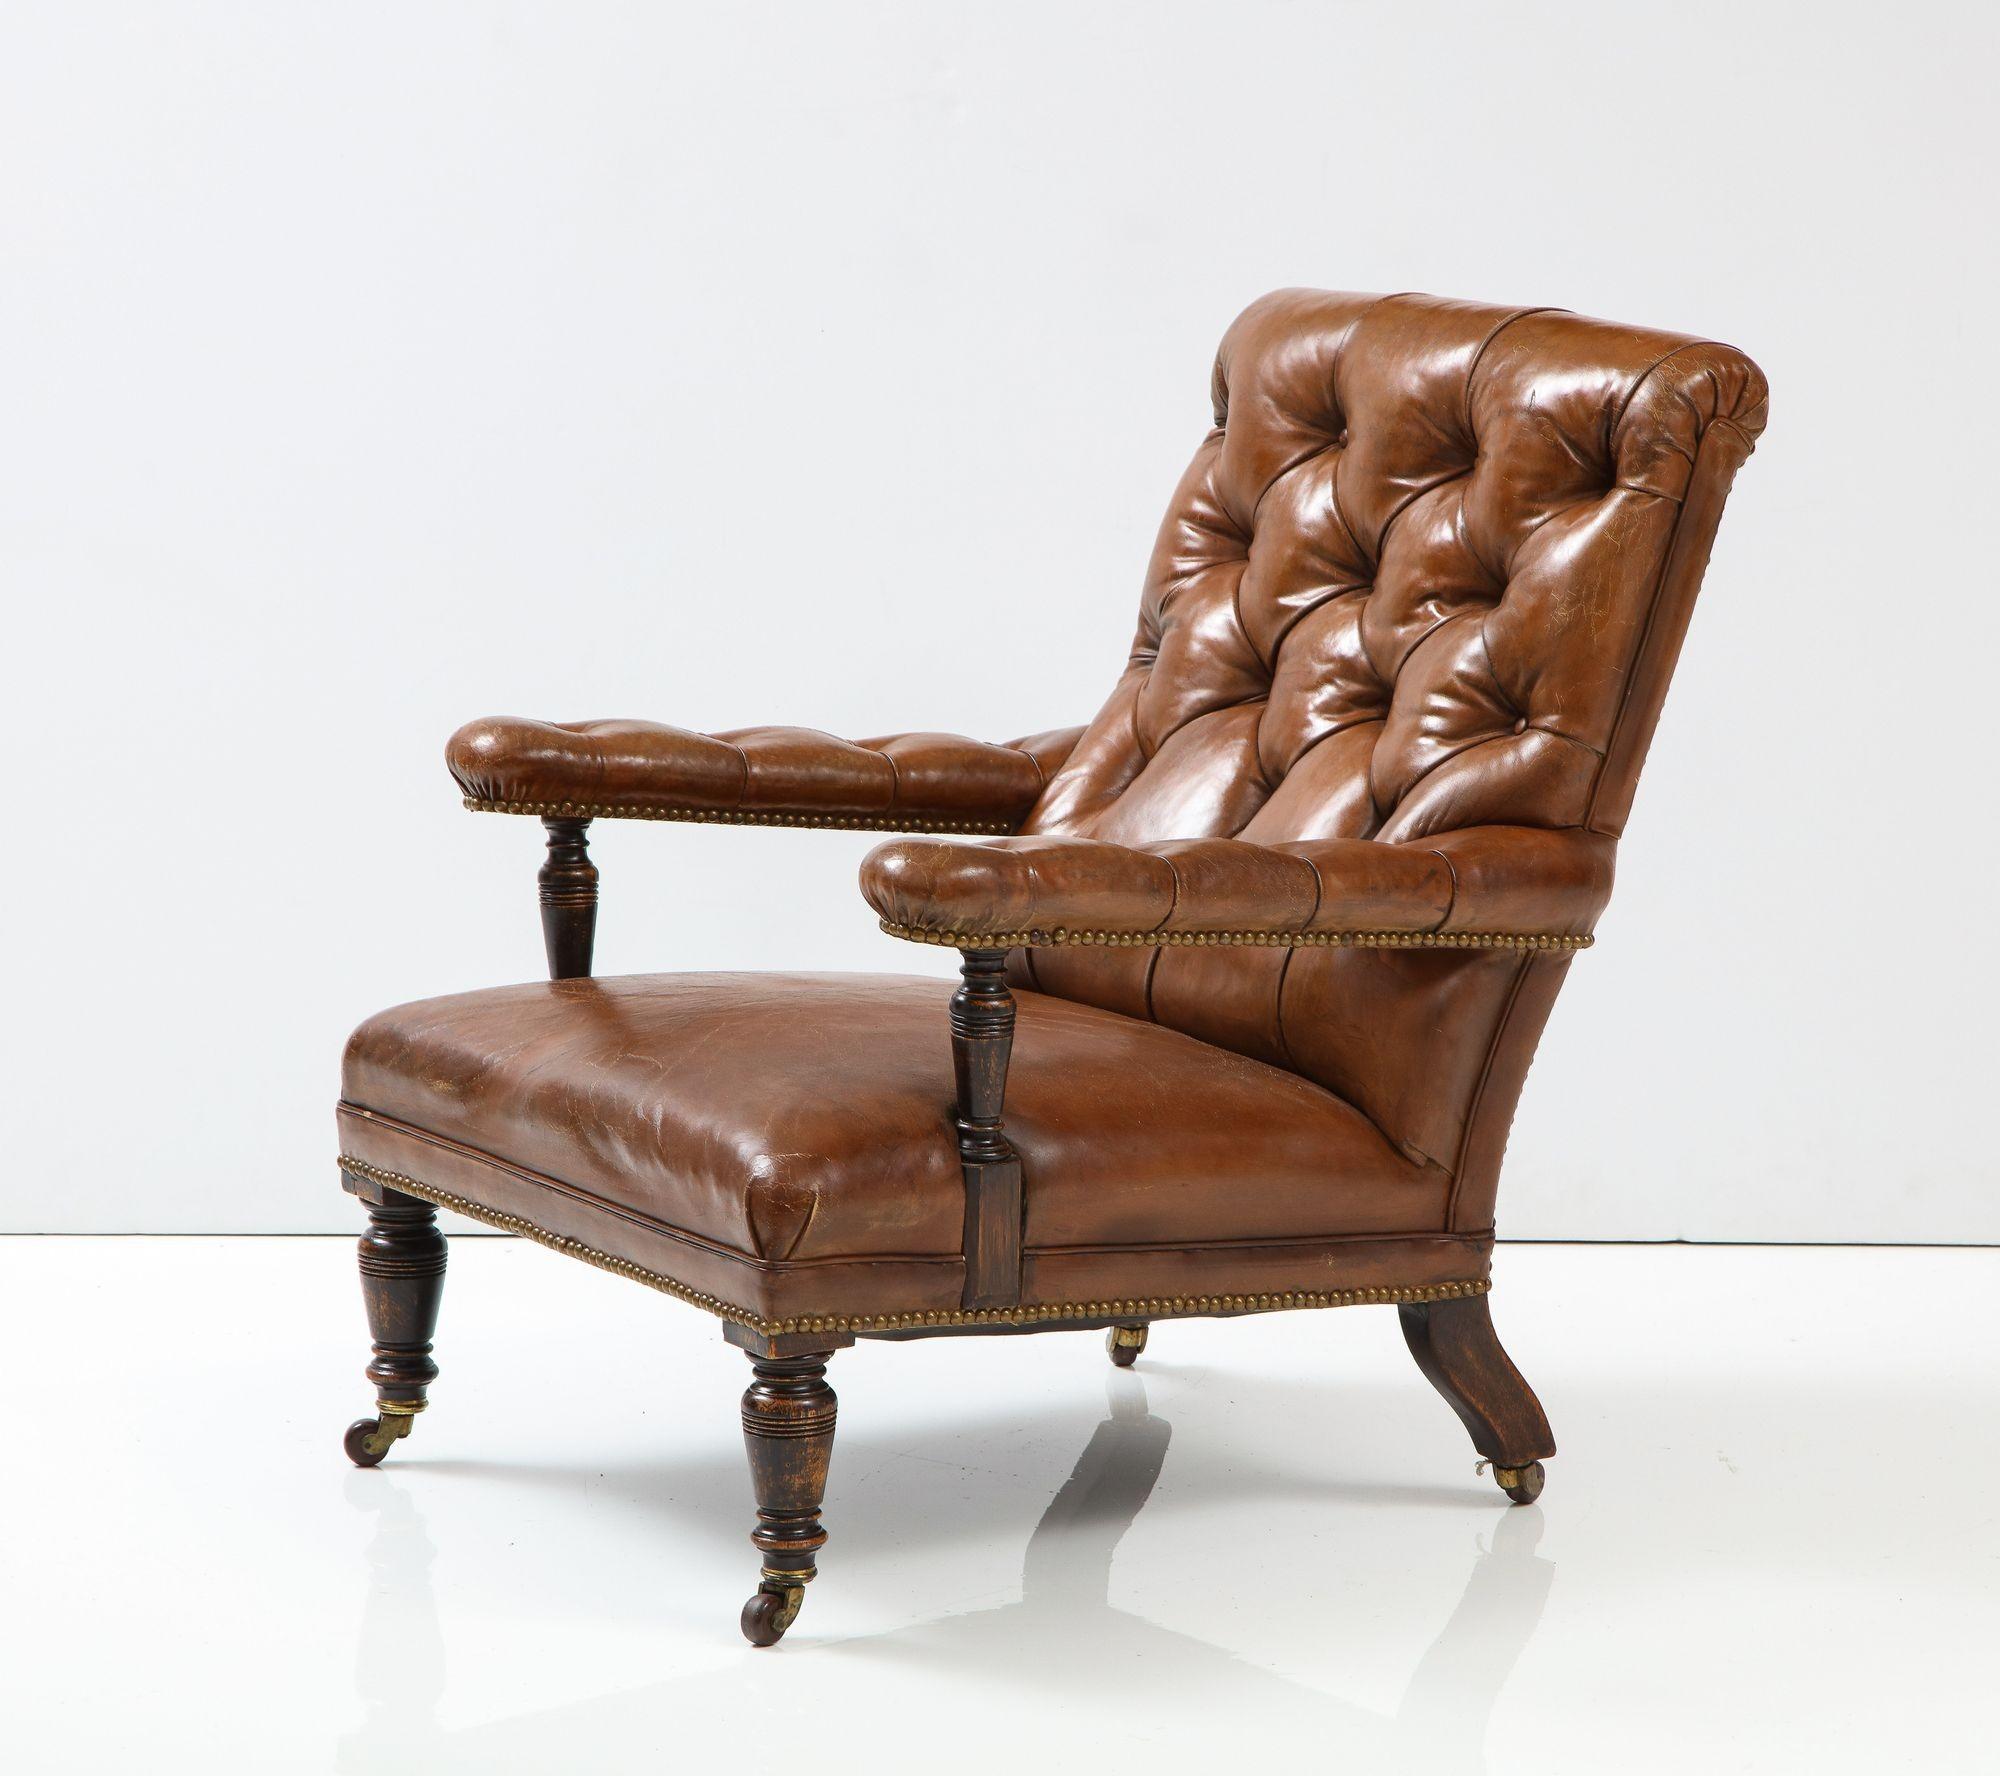 Good 19th c. English club chair in tobacco brown leather, the tufted back with easy pitch and having open arms with turned supports, over leather seat with turned legs and original brass castors, the whole with good color and patina.
 
Dimensions: